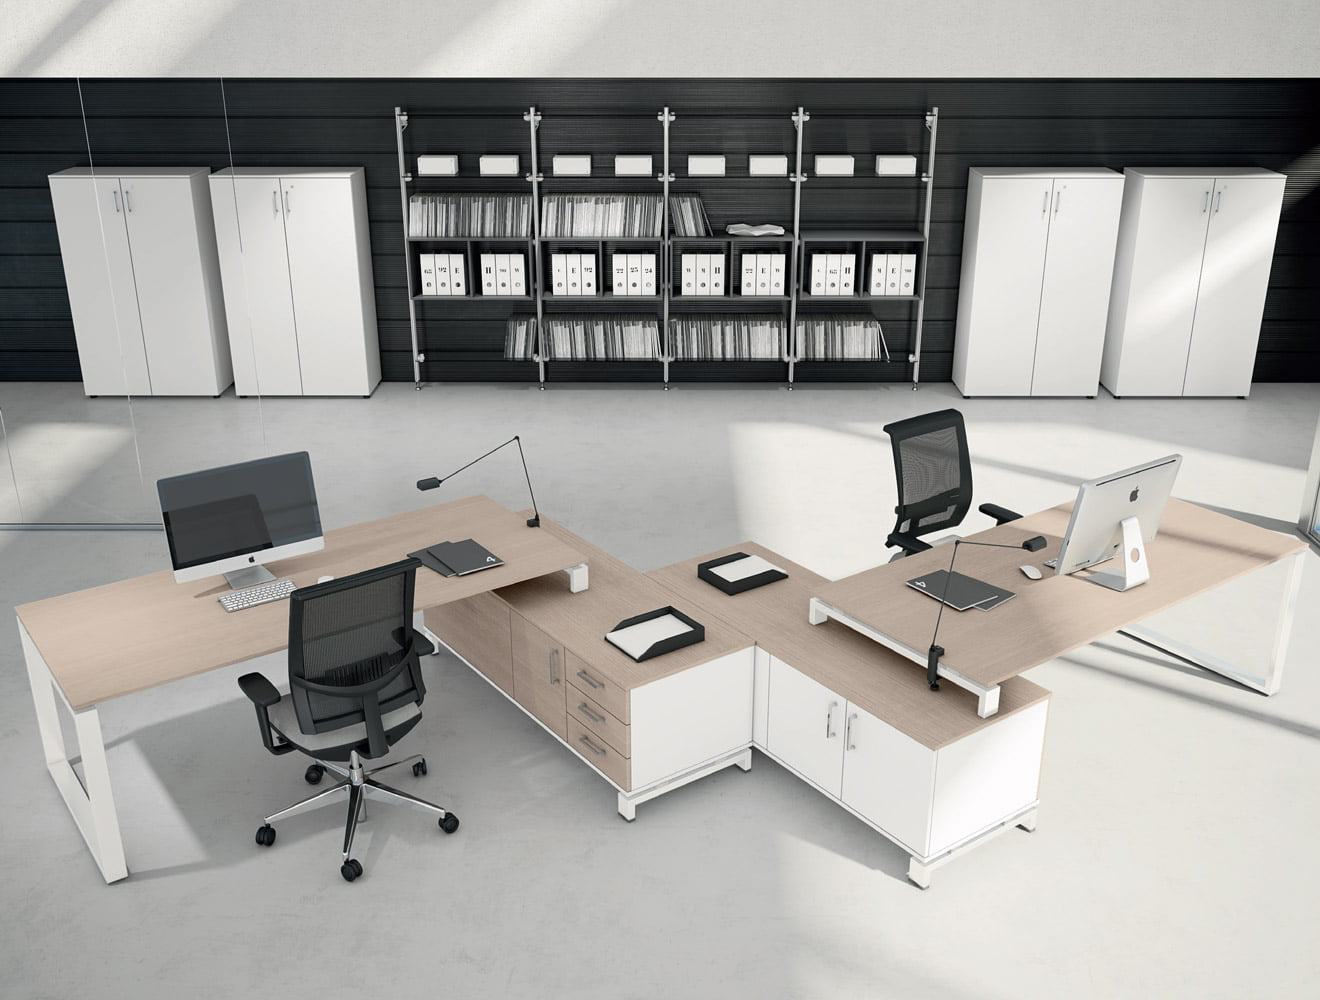 An extra-wide desk that can accommodate multiple monitors and accessories